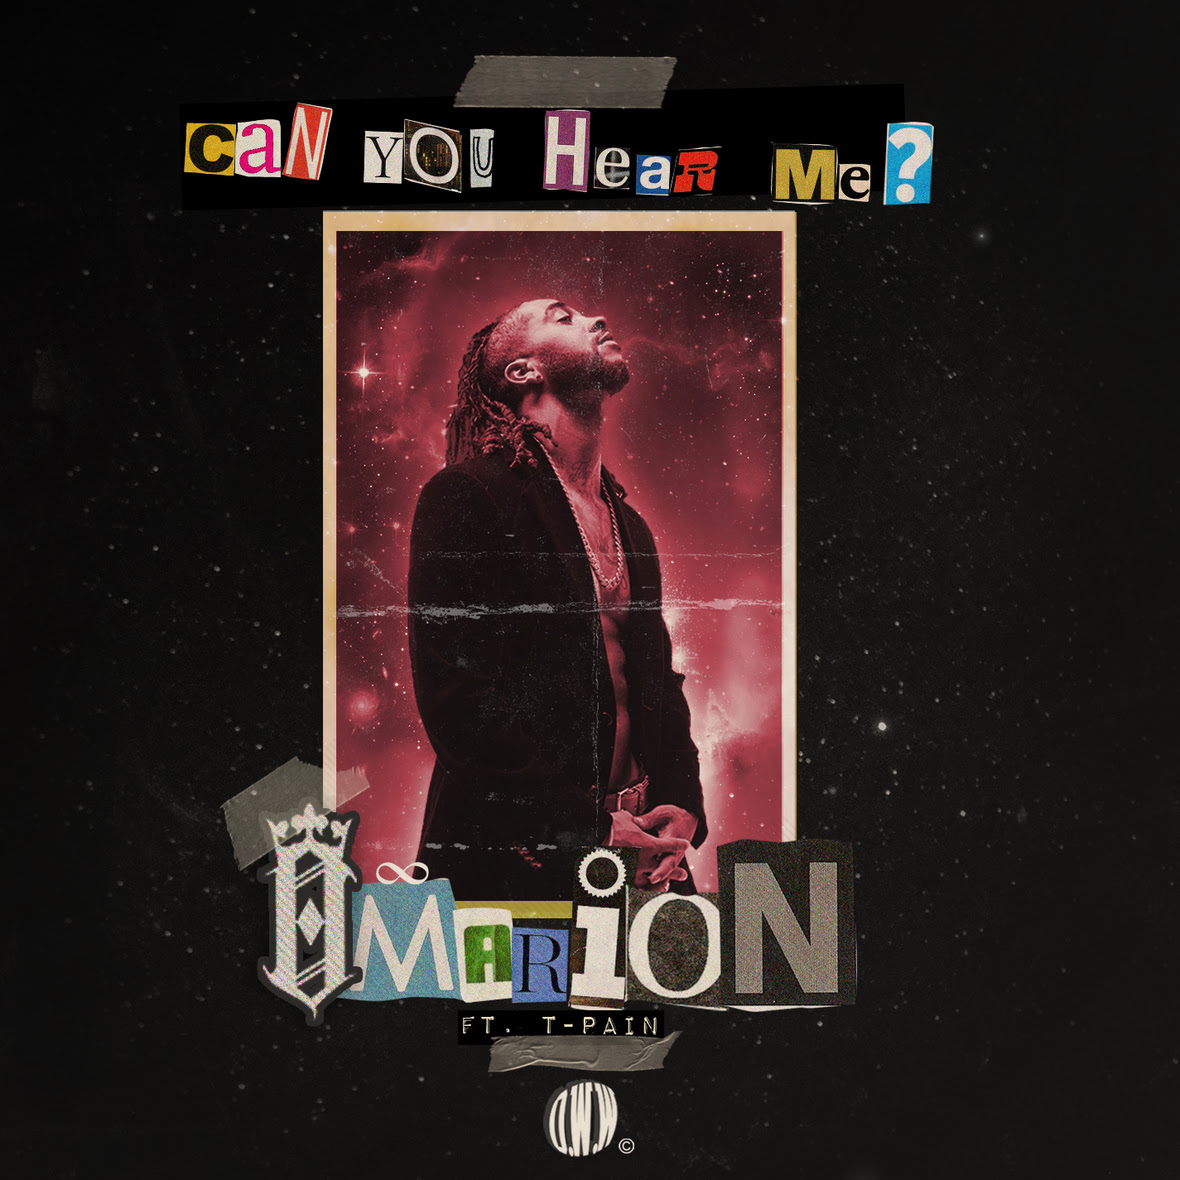 Omarion Feat. T-Pain – “Can You Hear Me?” [Audio]